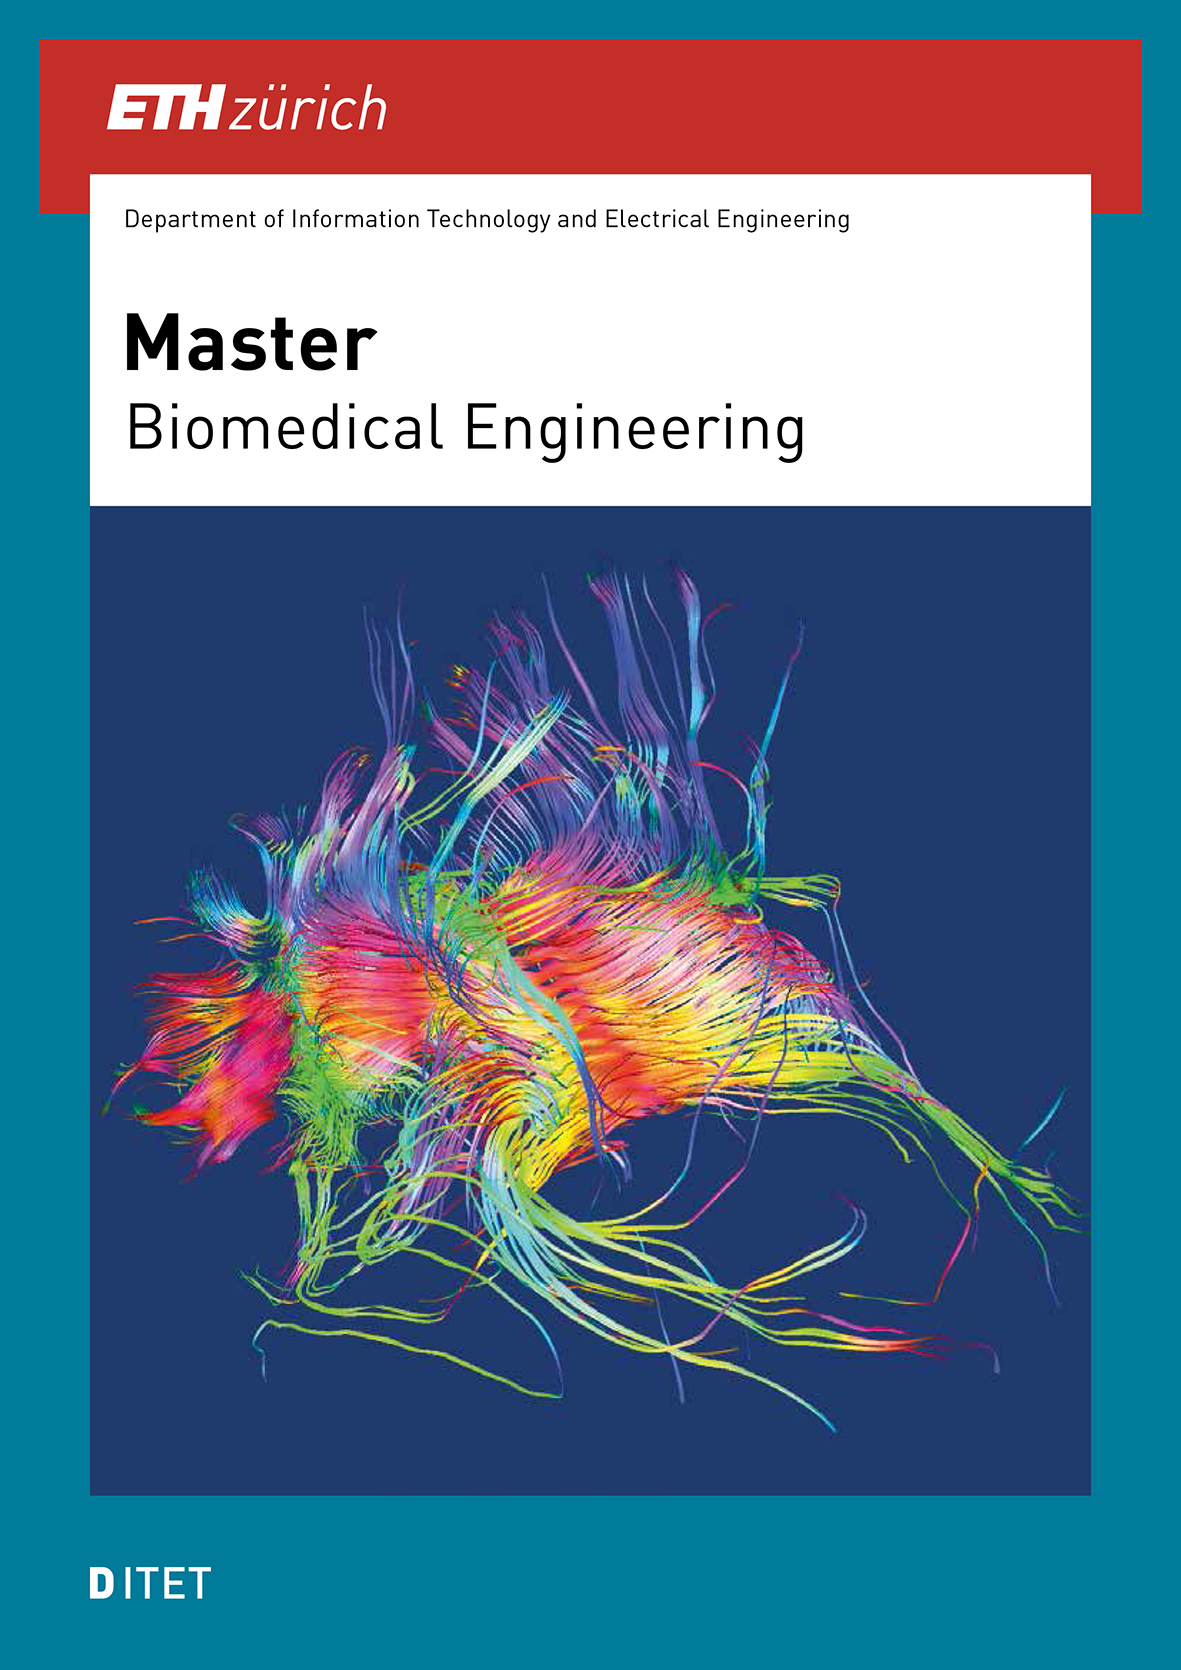 eth courses biomedical engineering